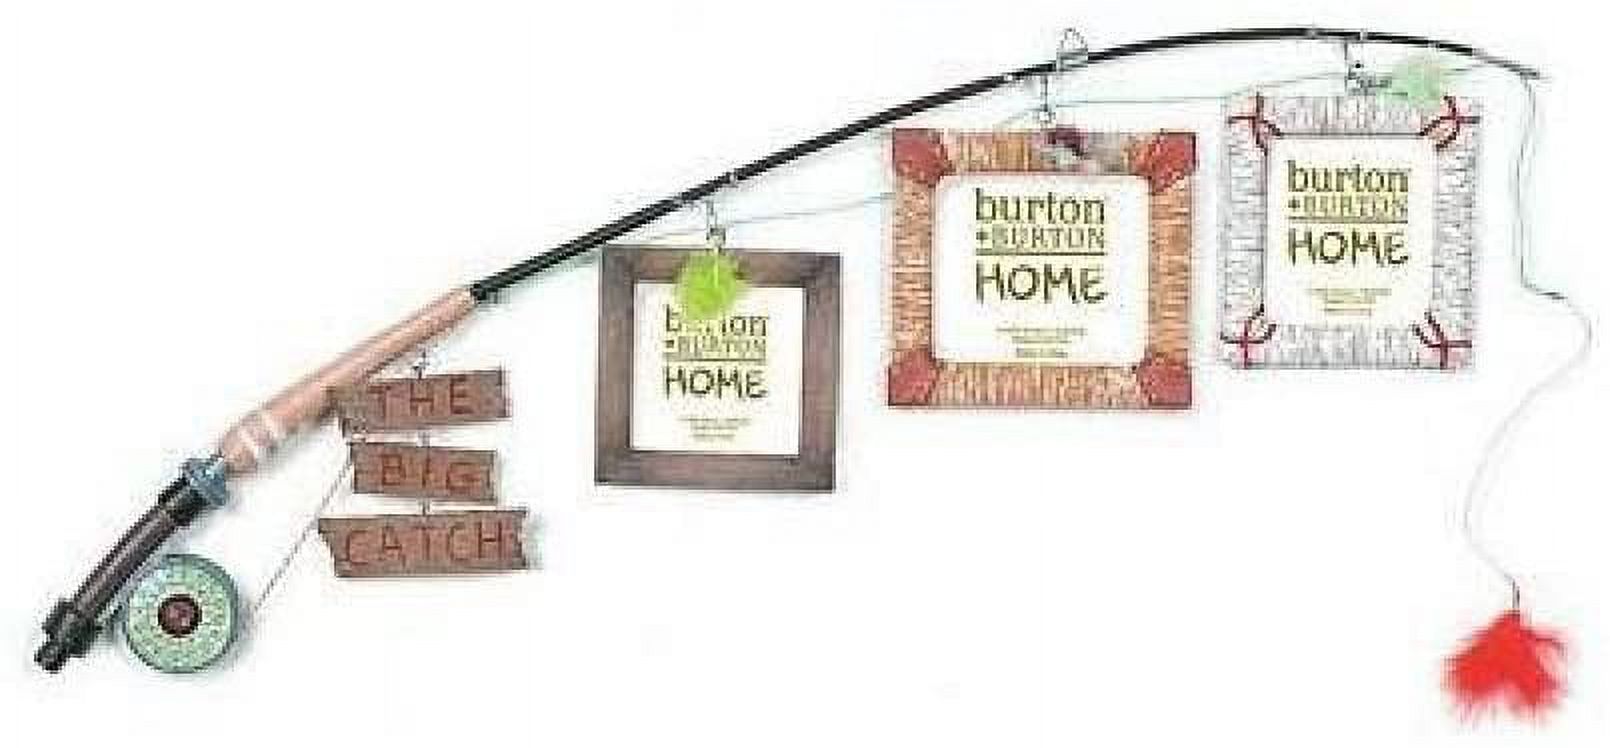 The Big Catch Fly Fishing Pole Photo Picture Holder Frame Themed Decor - image 4 of 5